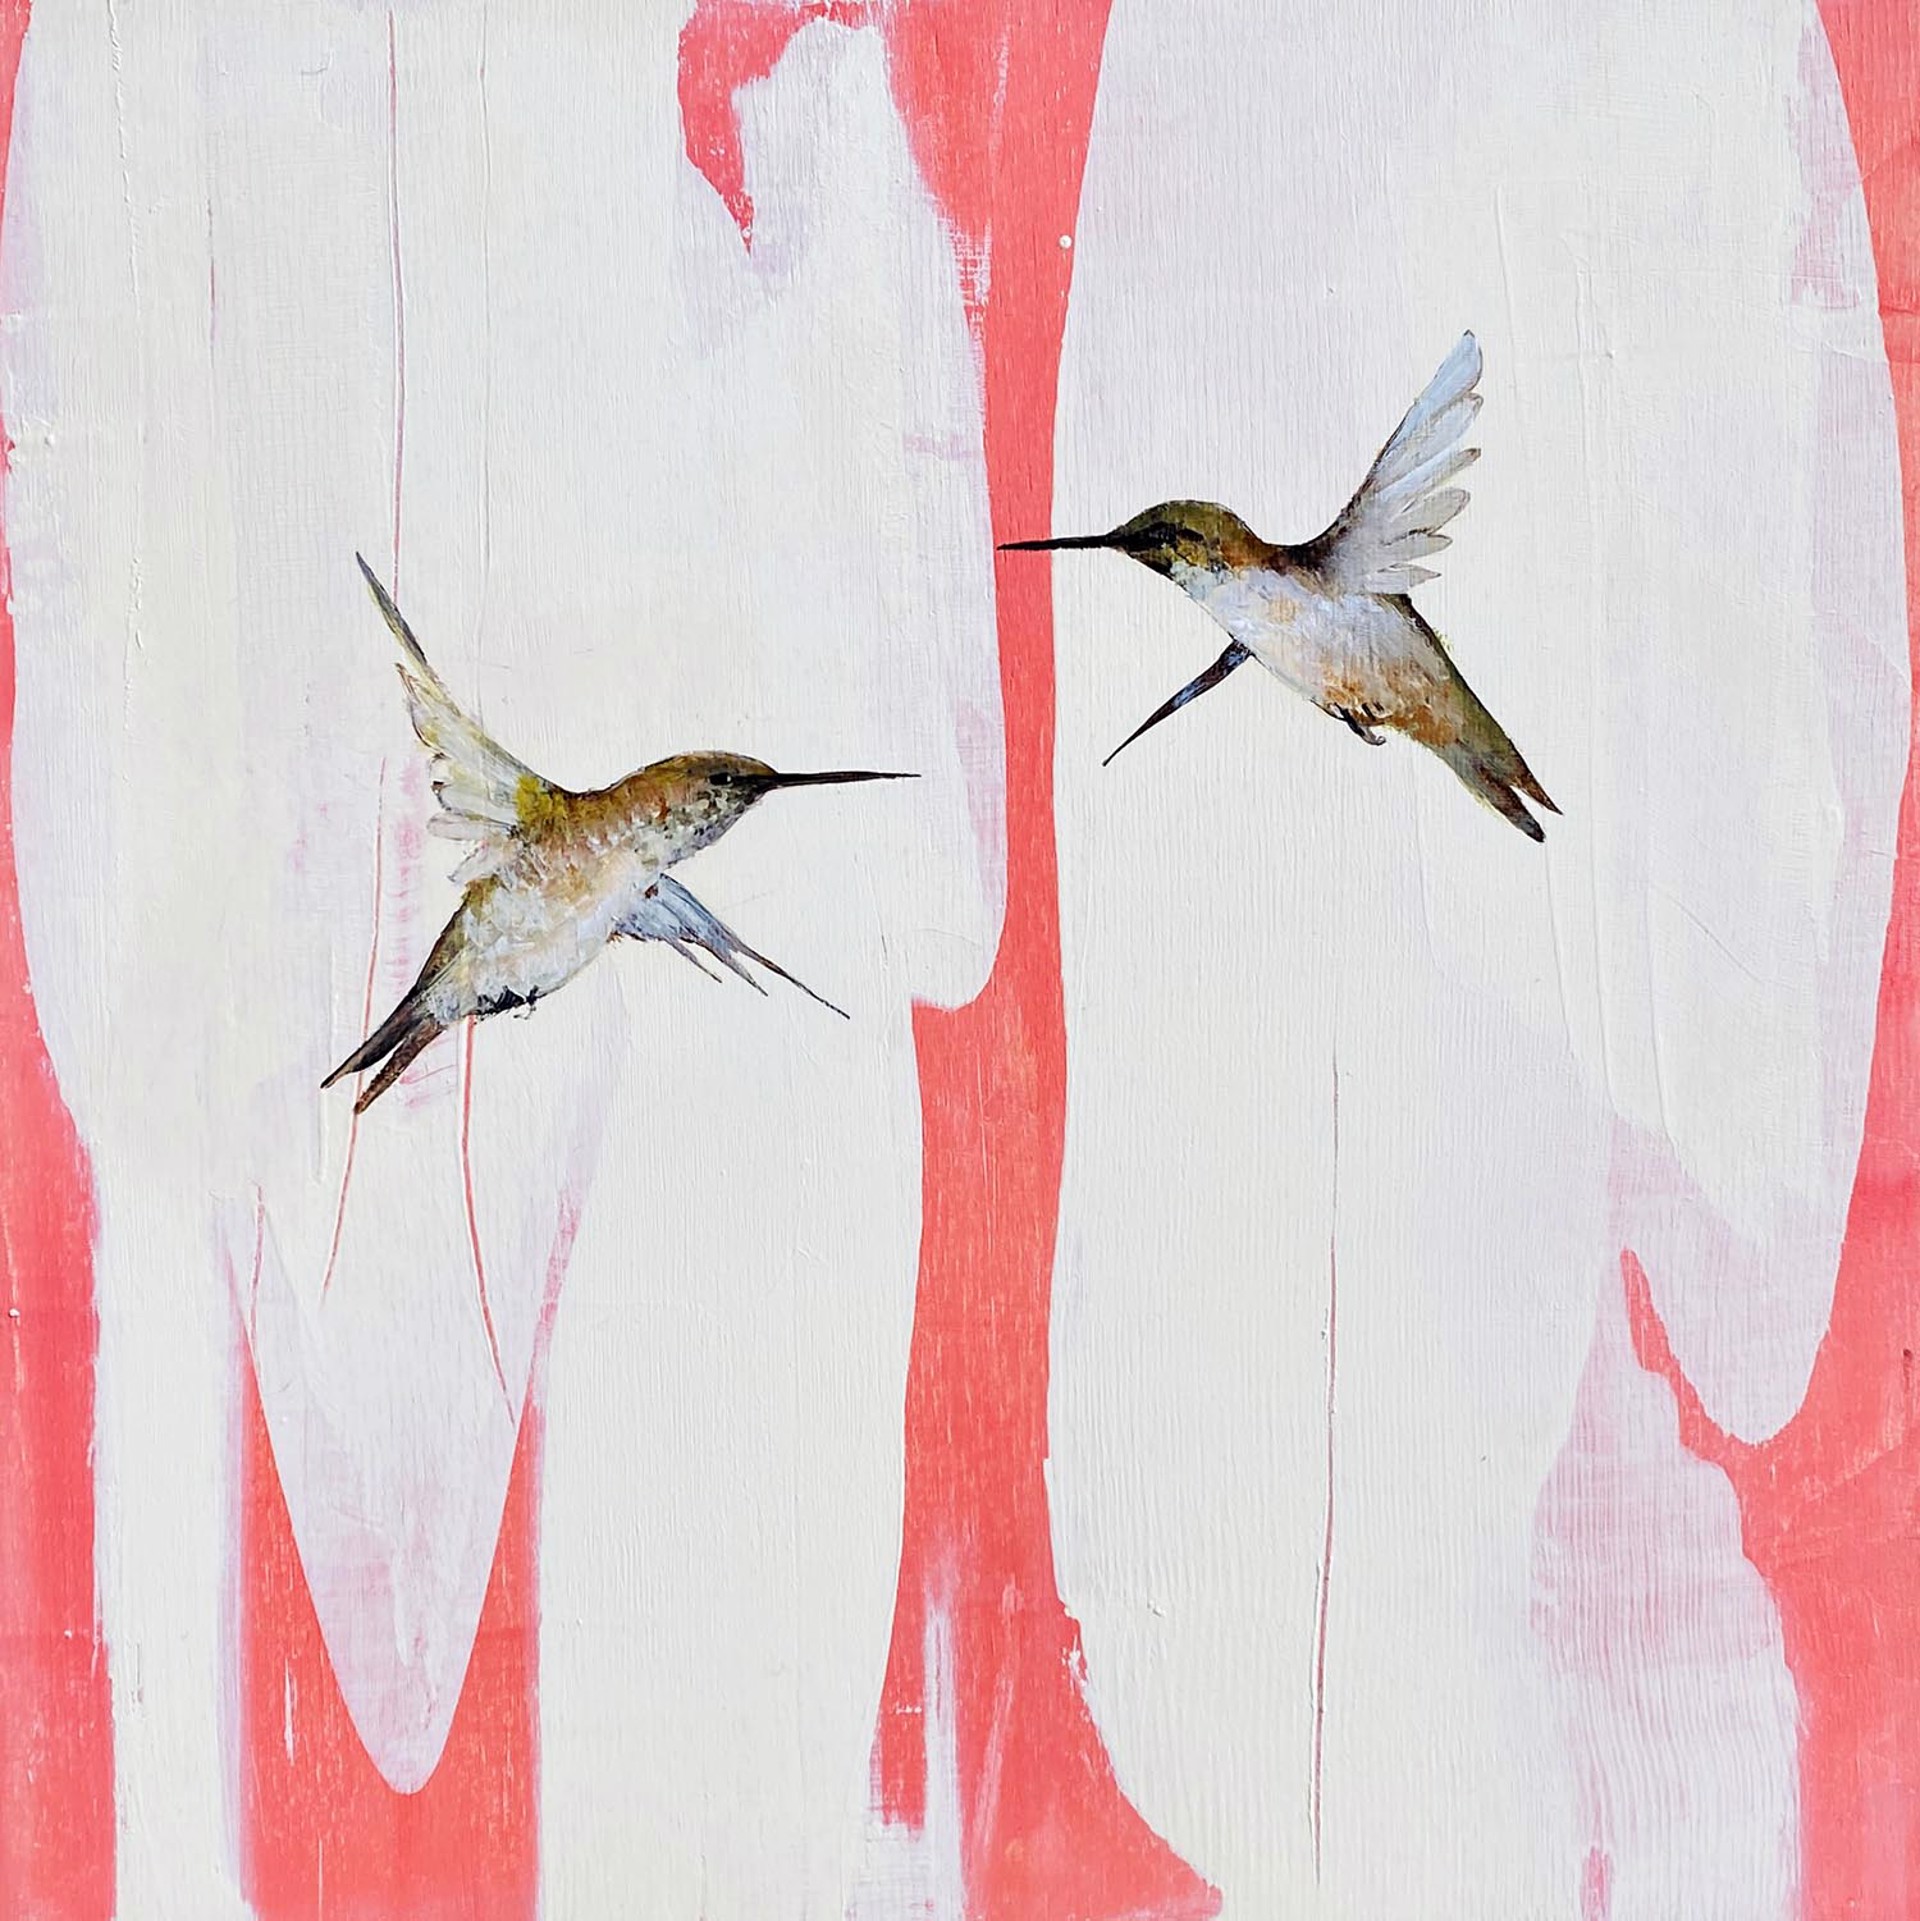 Original Mixed Media Painting By Jenna Von Benedikt Featuring Two Hummingbirds On Abstract Red And White Background